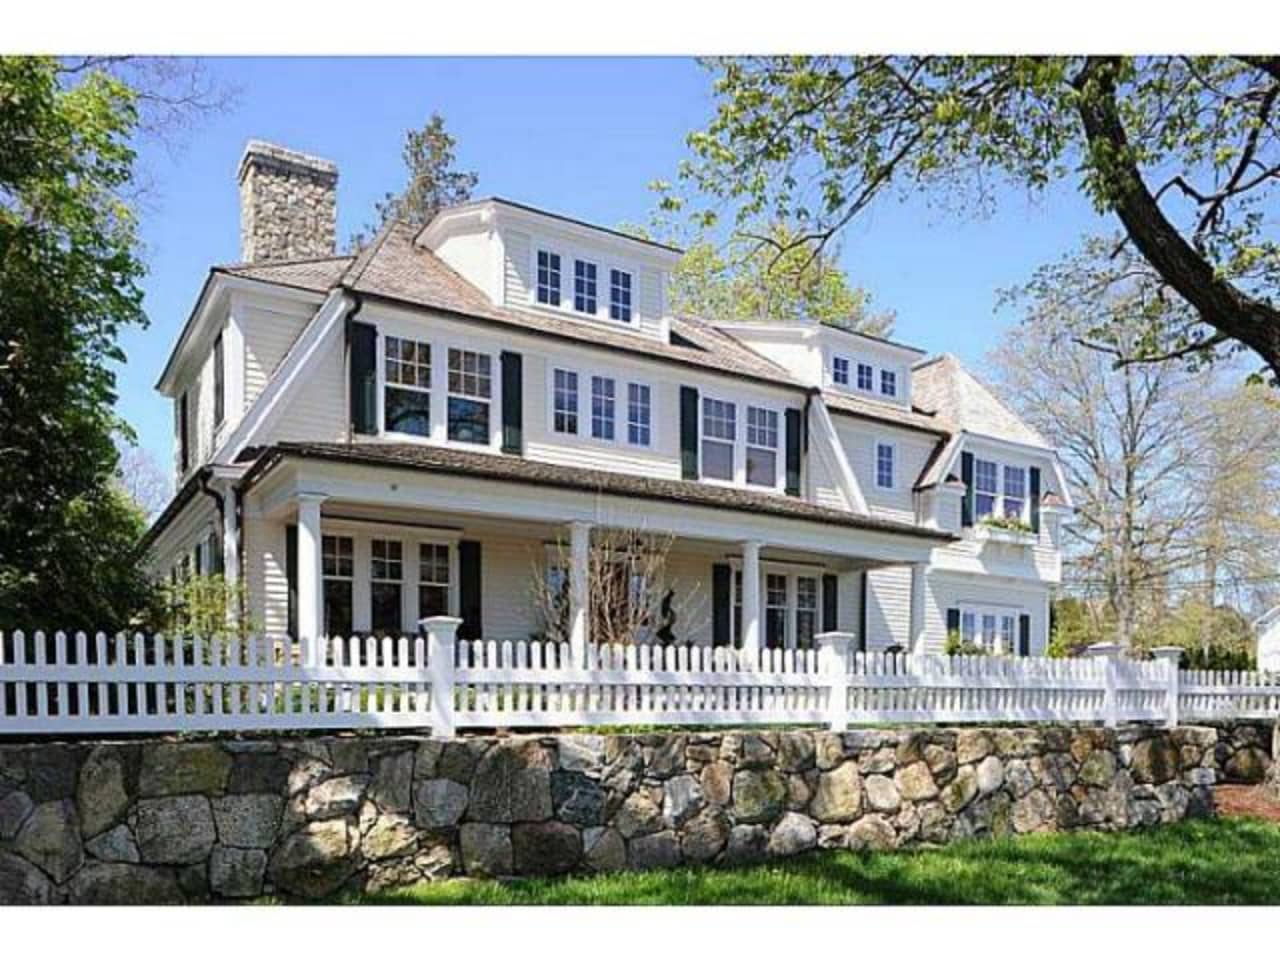 The home at 401 South Ave. in New Canaan recently sold for $2.59 million. 